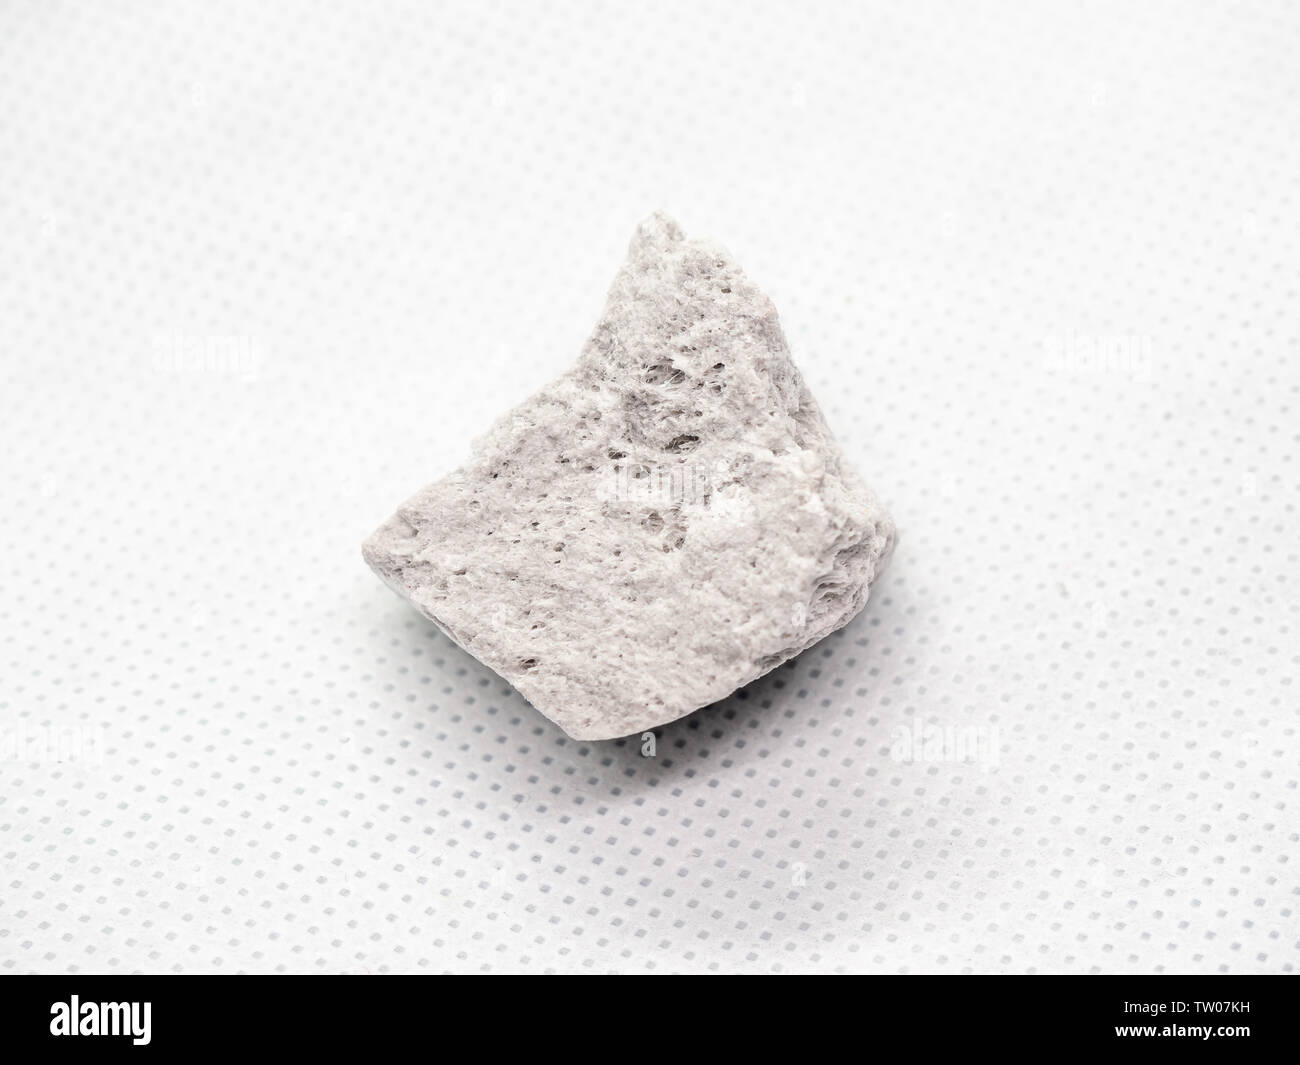 Geological specimen of natural white Pumice (pumicite, volcanic rock) on white background Stock Photo